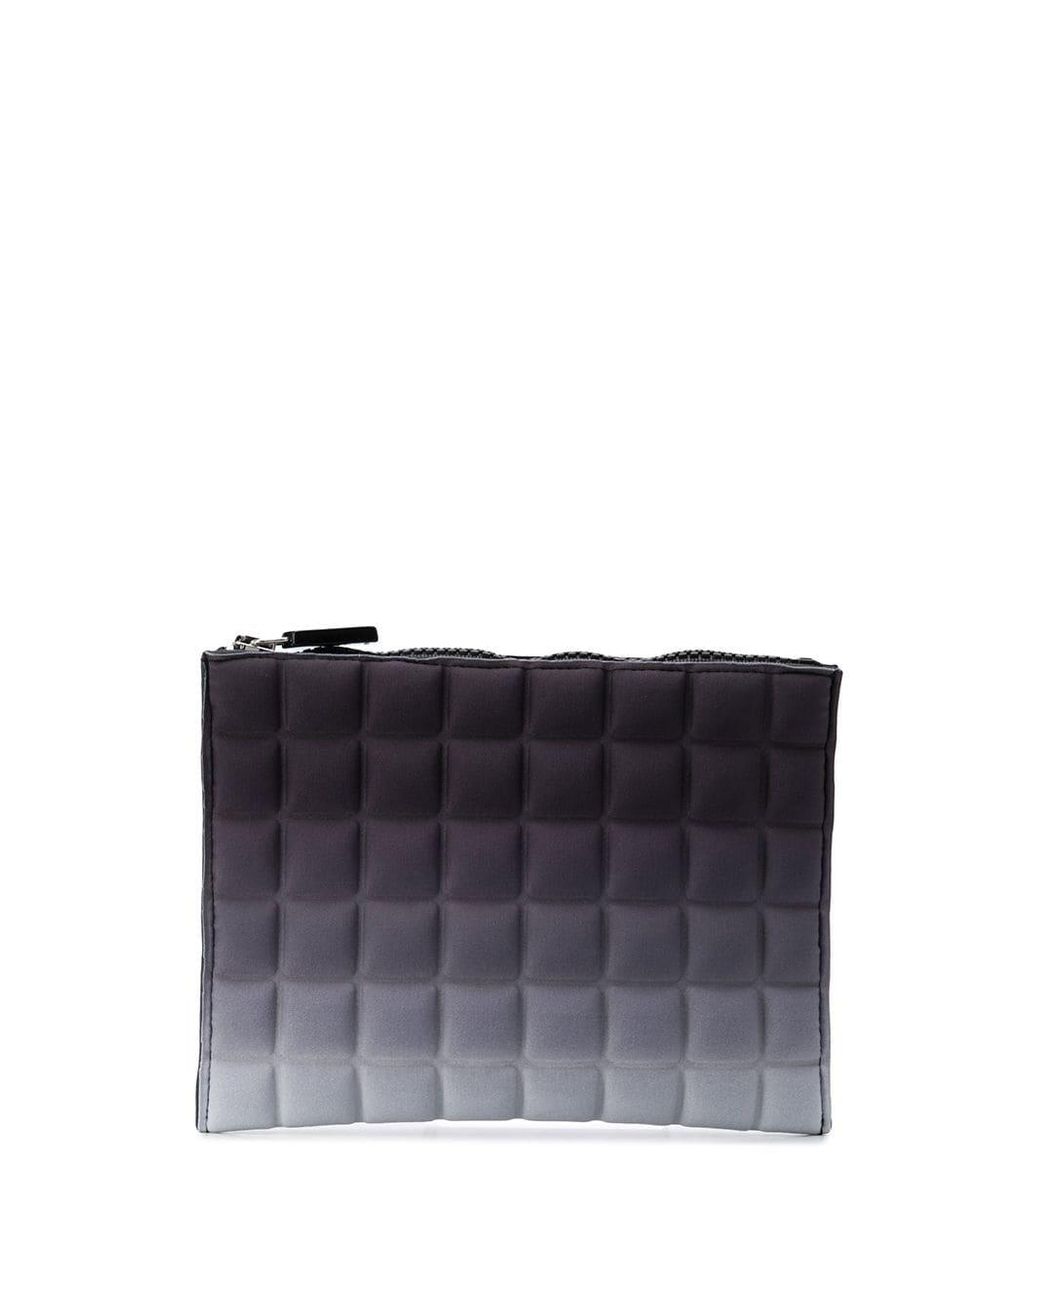 NO KA 'OI Synthetic Quilted Clutch Bag in Grey (Gray) - Lyst